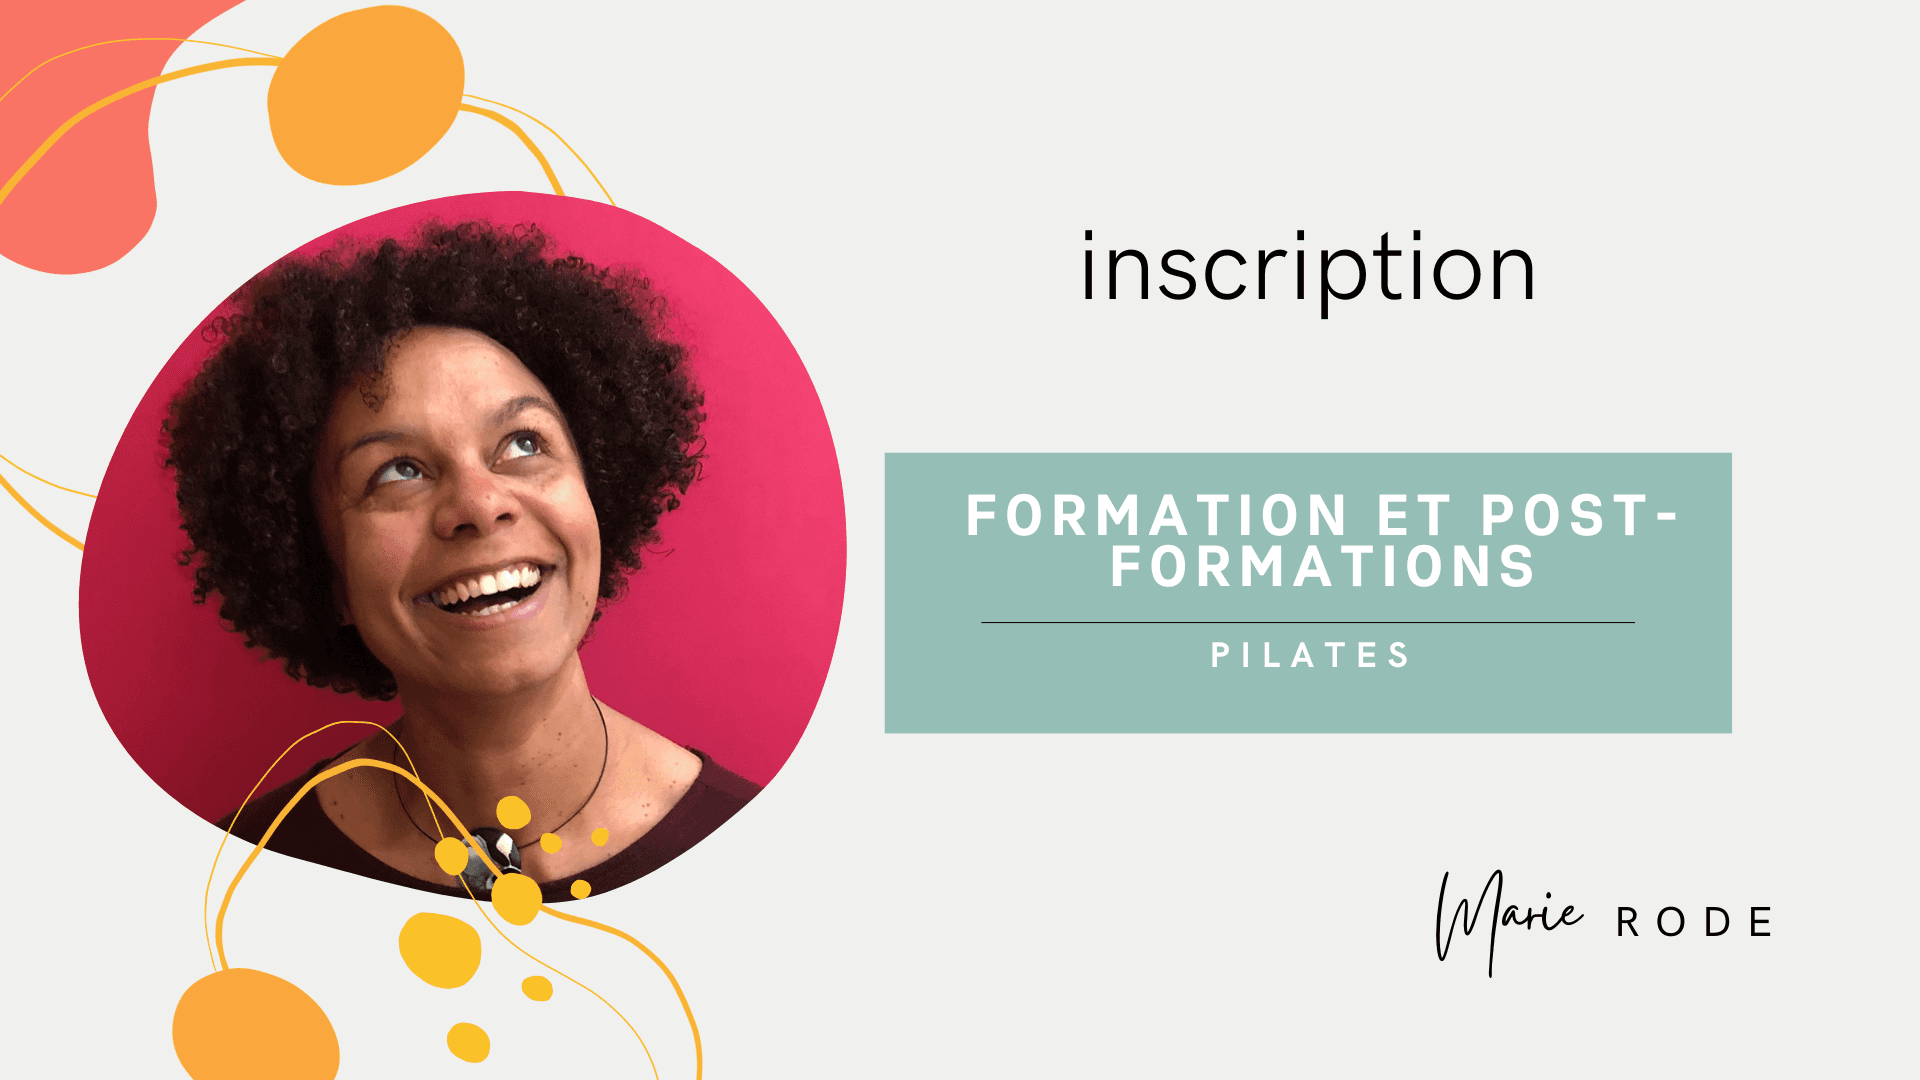 https://storage.tally.so/e863ae26-bd3d-4500-a0c6-5db65374226b/2023_couverture-Tally-inscription-formation-pilates-pro.png